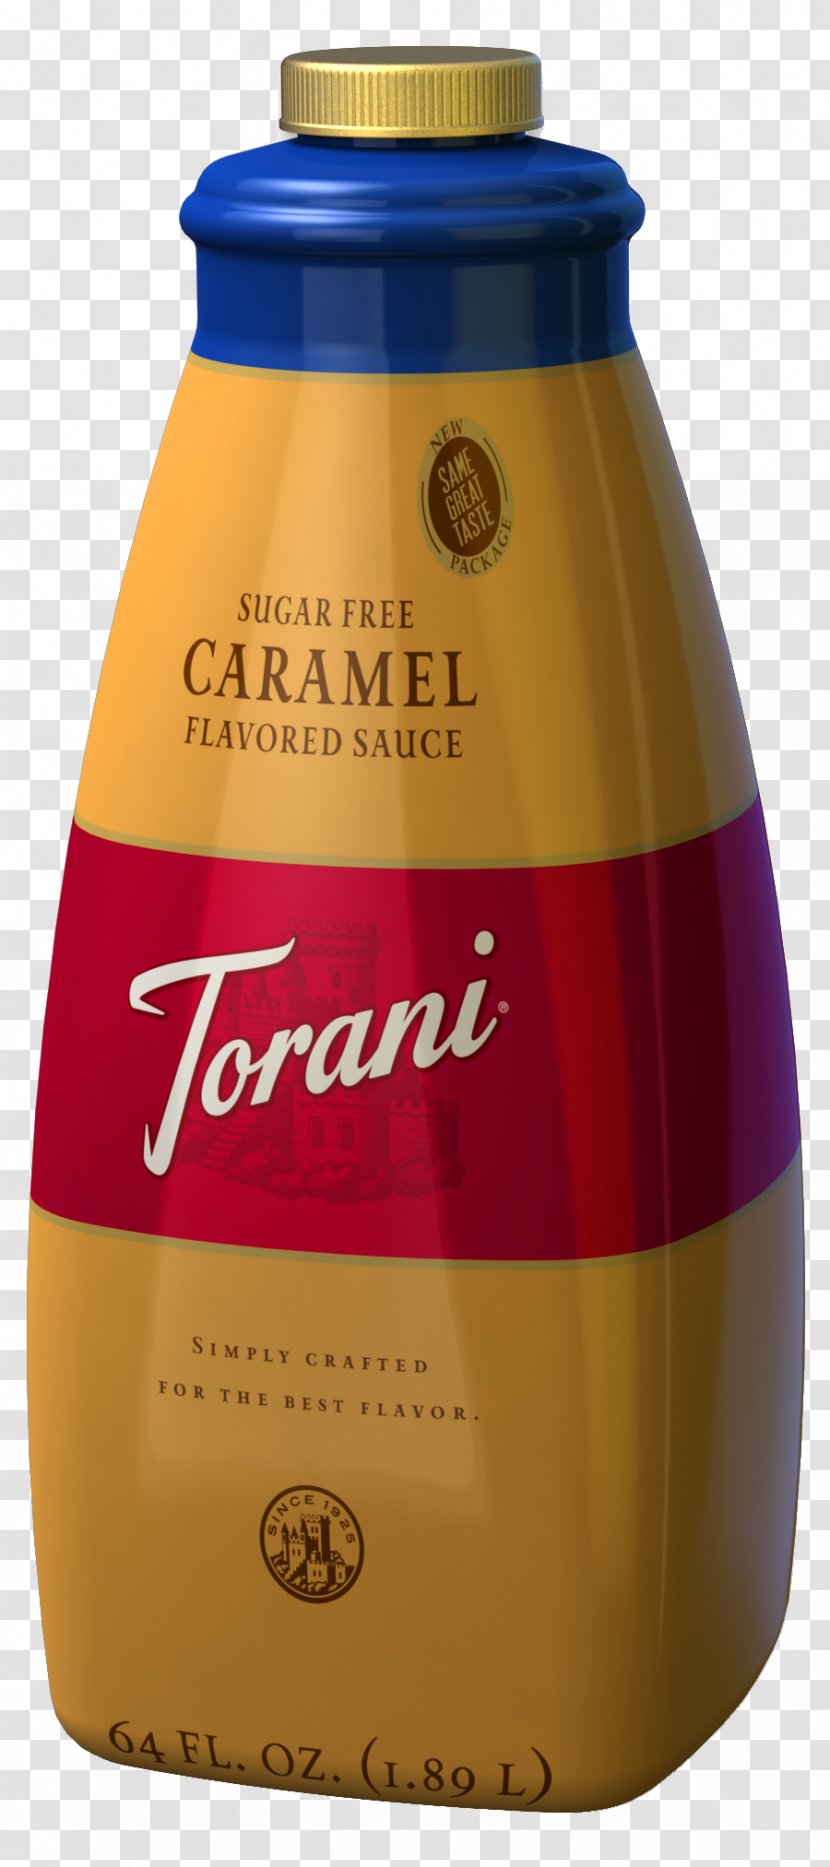 R. Torre & Company, Inc. Coffee White Chocolate Sugar Substitute Caramel Transparent PNG